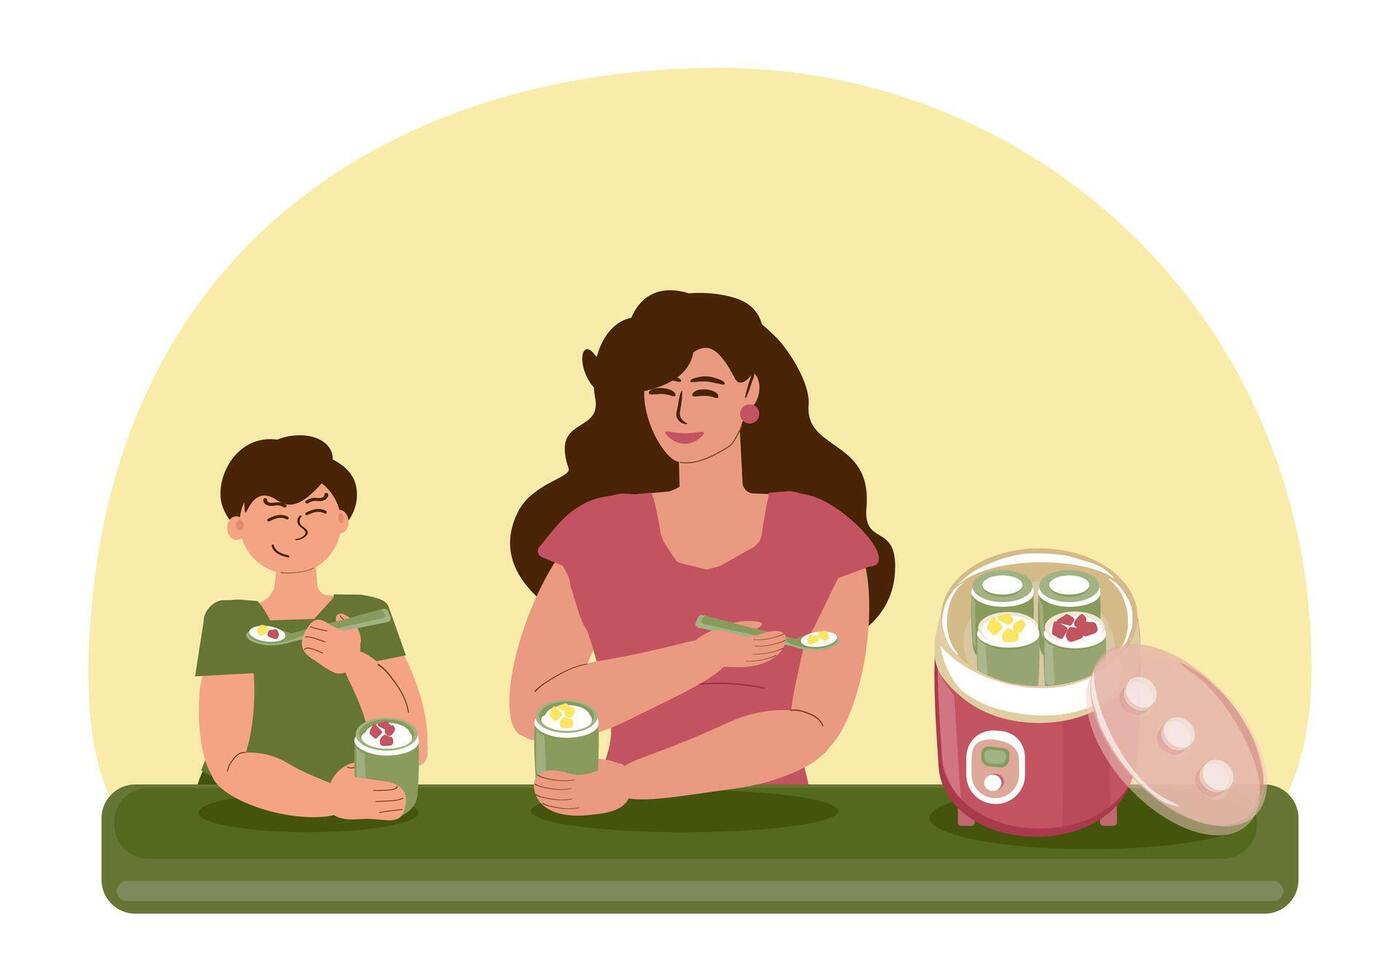 Mom and son eat homemade fruit yogurt together in a good mood. There is an electric yogurt maker with the finished product on the table. Useful and healthy food, family at breakfast. Vector